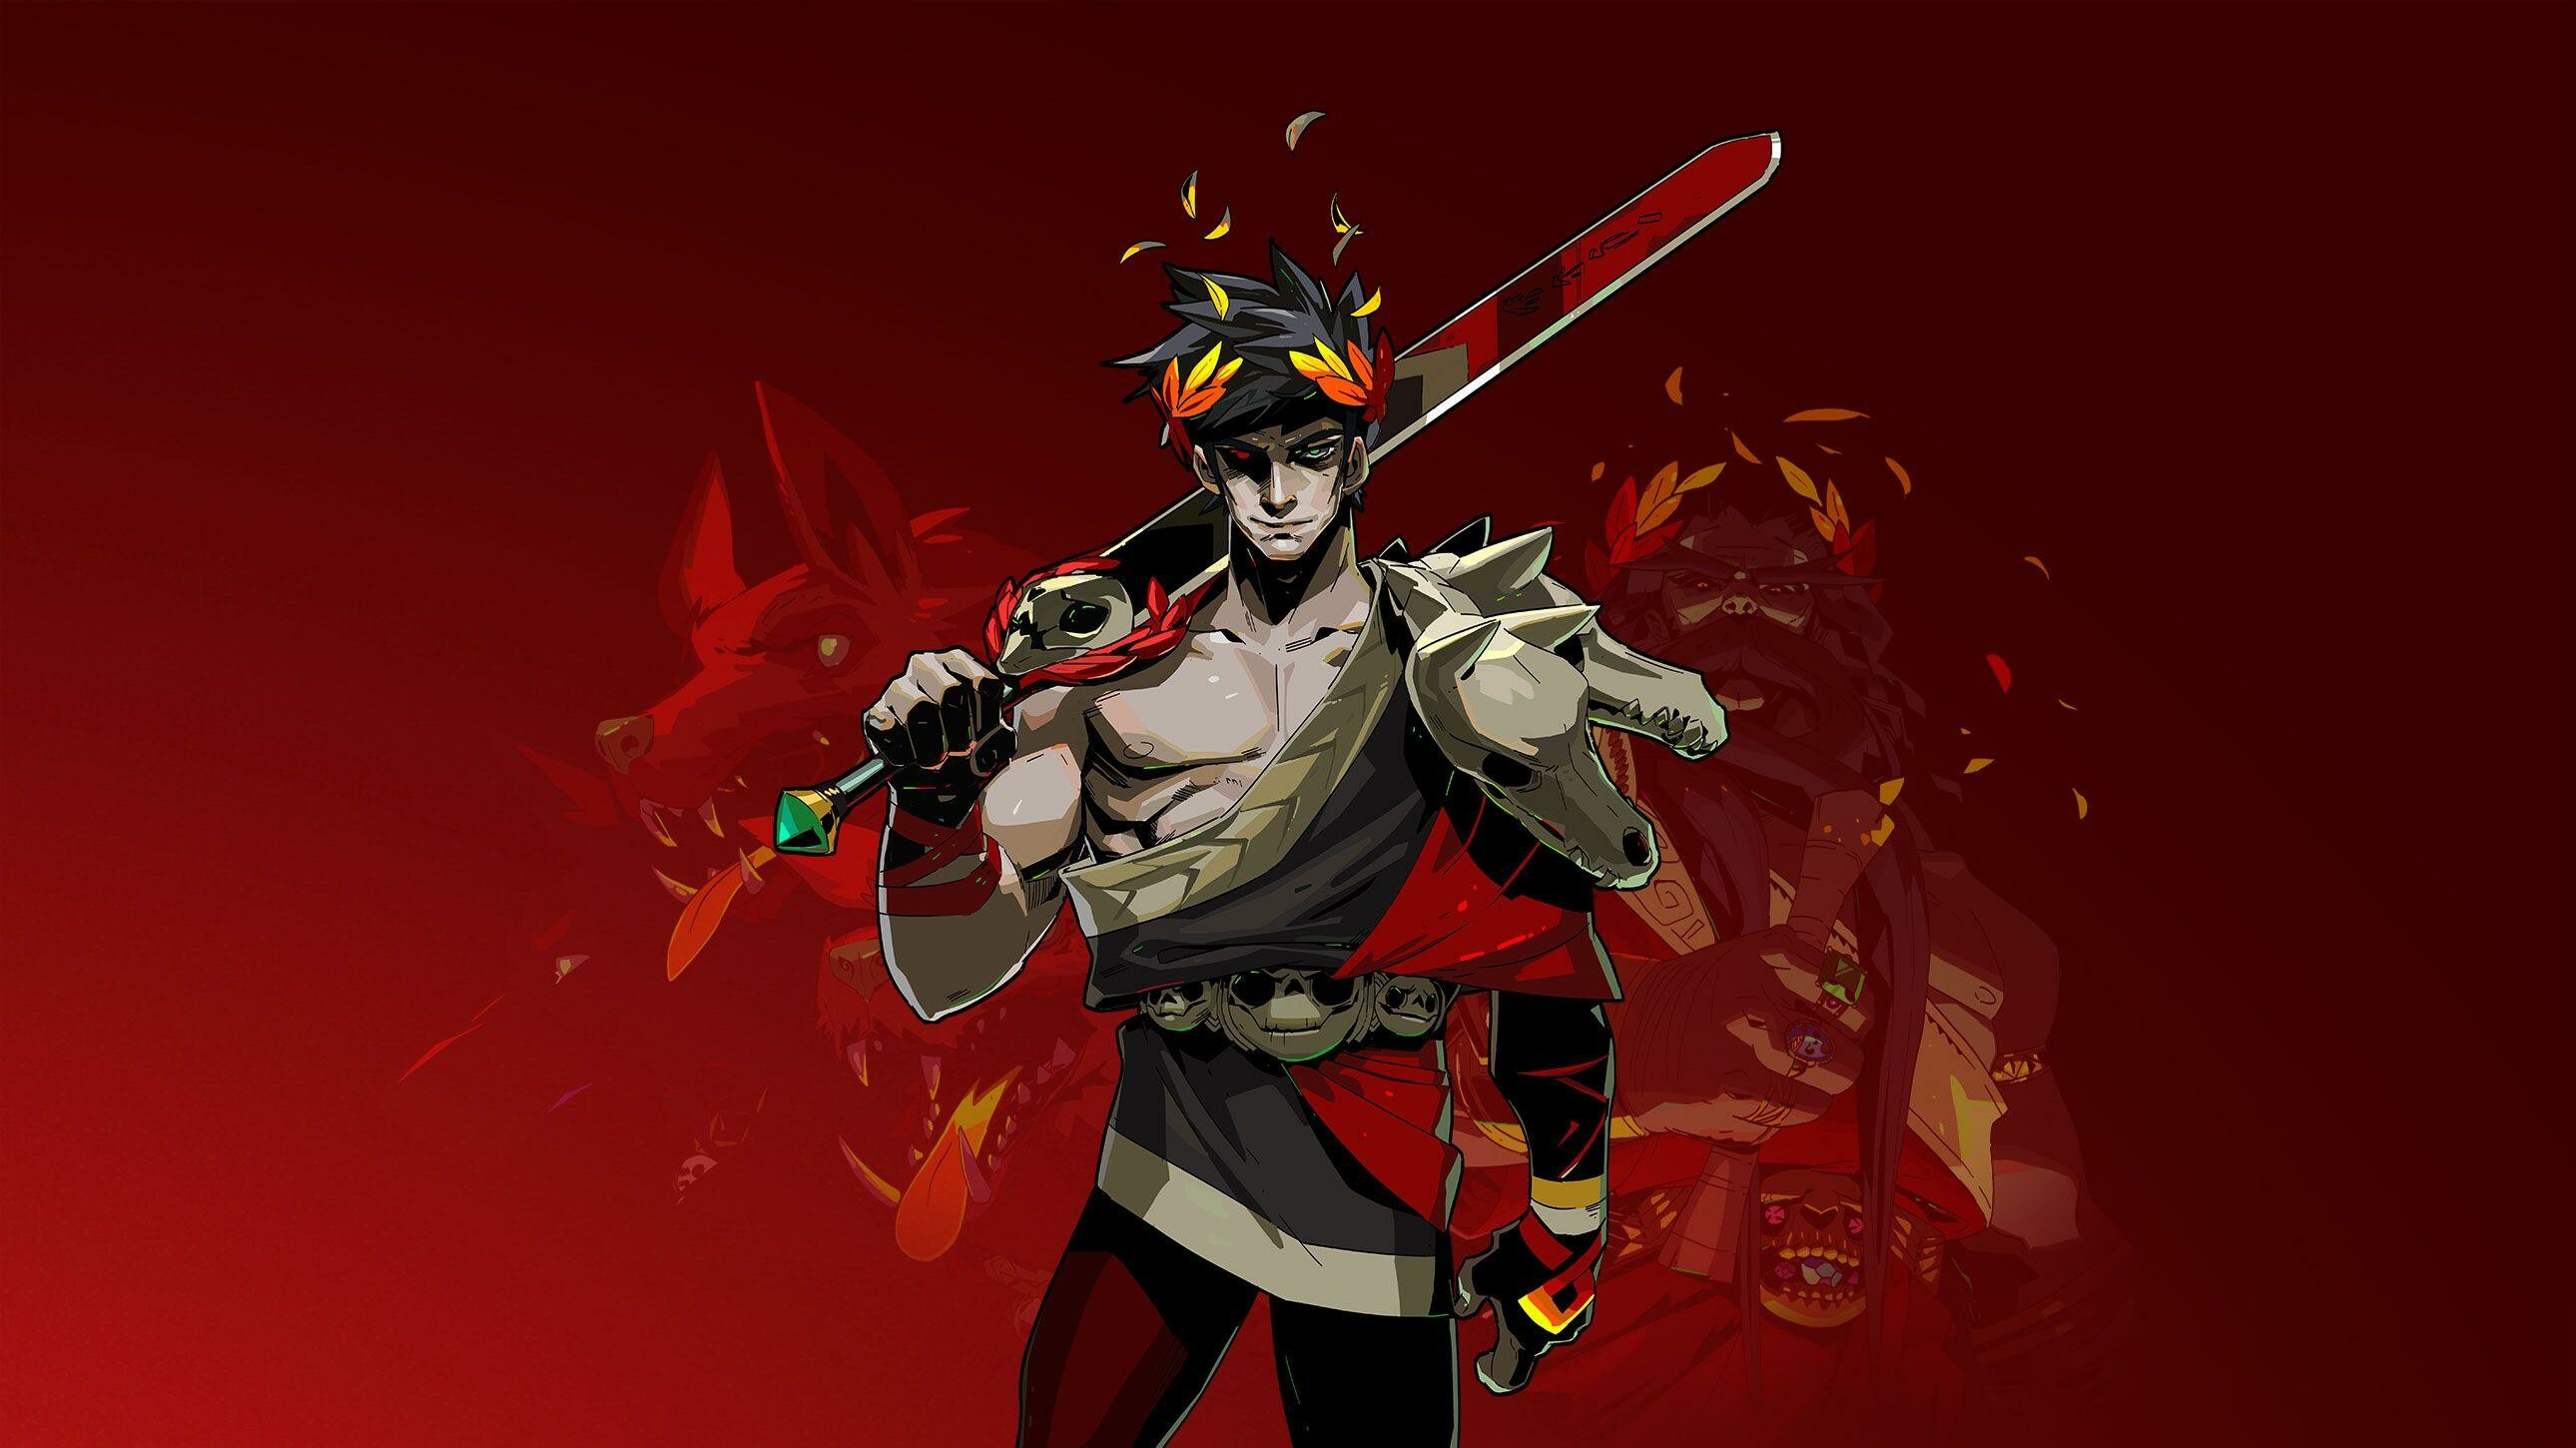 Hades: Players control Zagreus, as he attempts to escape from the Underworld to reach Mount Olympus, at times aided by gifts bestowed on him from the other Olympians. 2580x1450 HD Wallpaper.